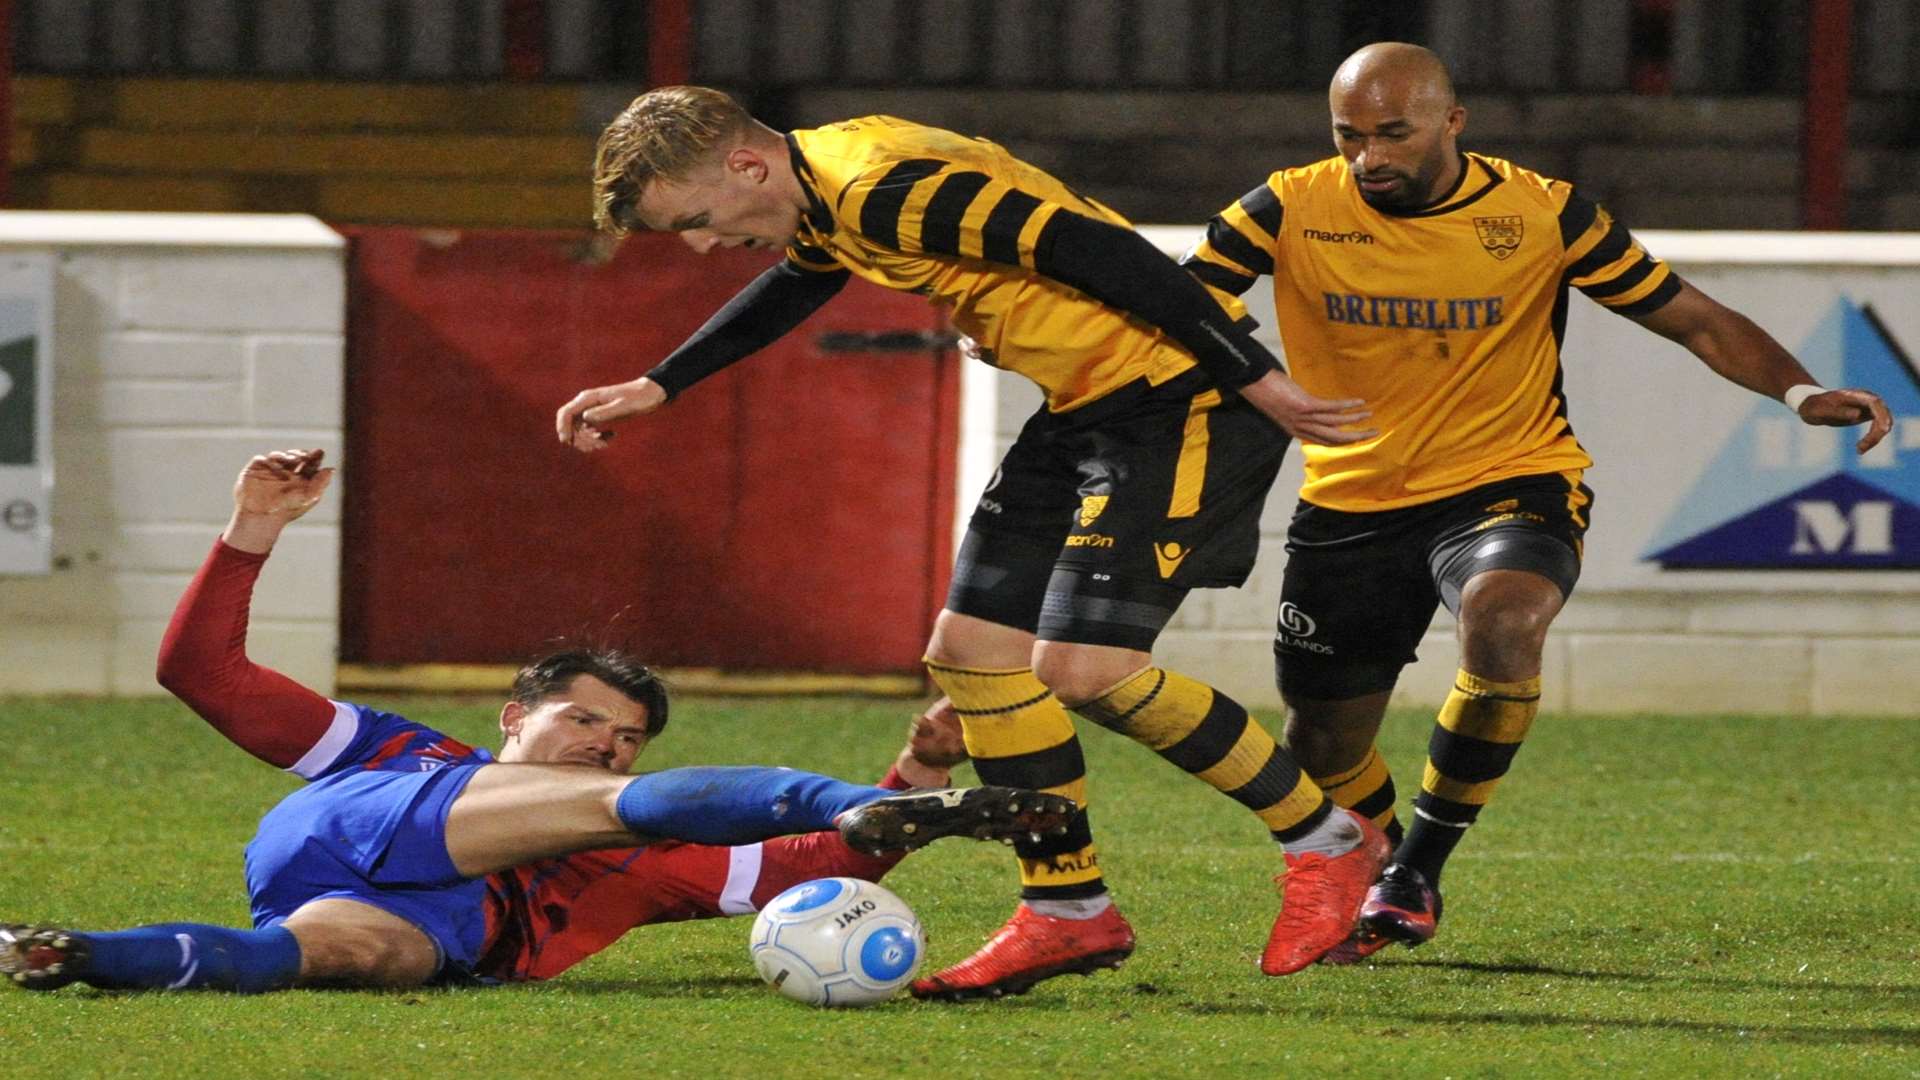 Joe Pigott and Delano Sam-Yorke defend from the front Picture: Steve Terrell